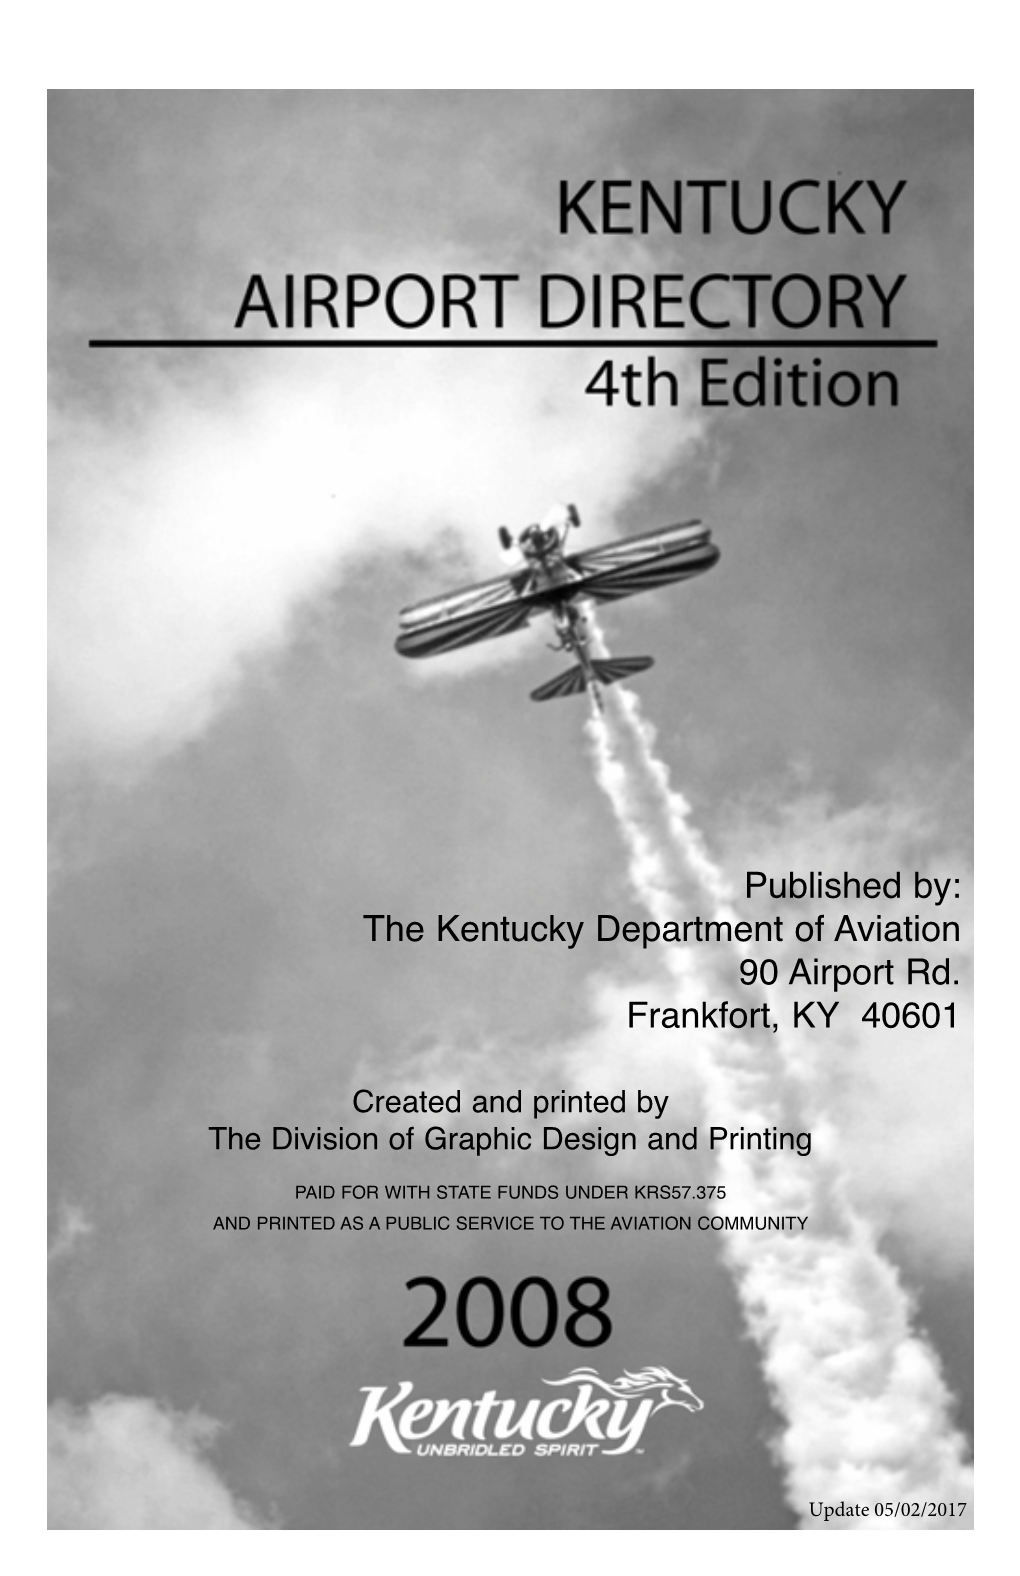 Published By: the Kentucky Department of Aviation 90 Airport Rd